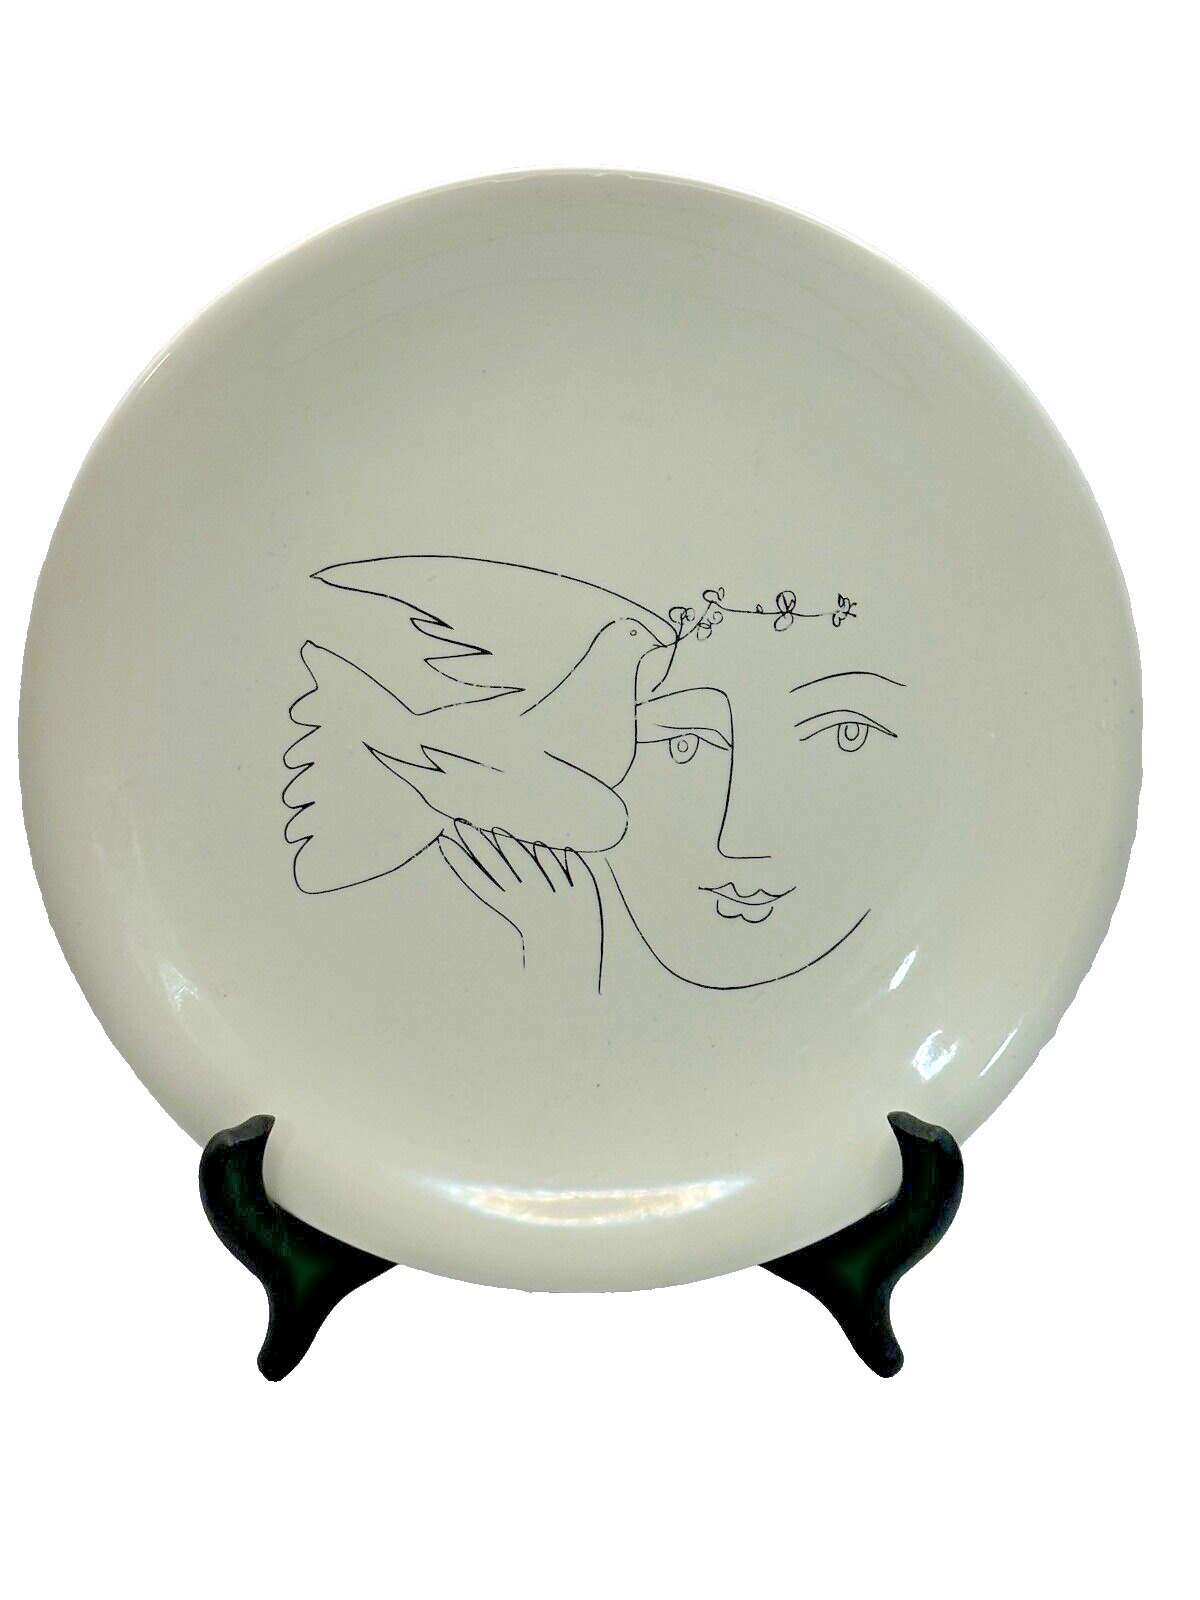 Pablo Picasso Women with Dove Plate Signed Vintage Mid Century Modern Decor